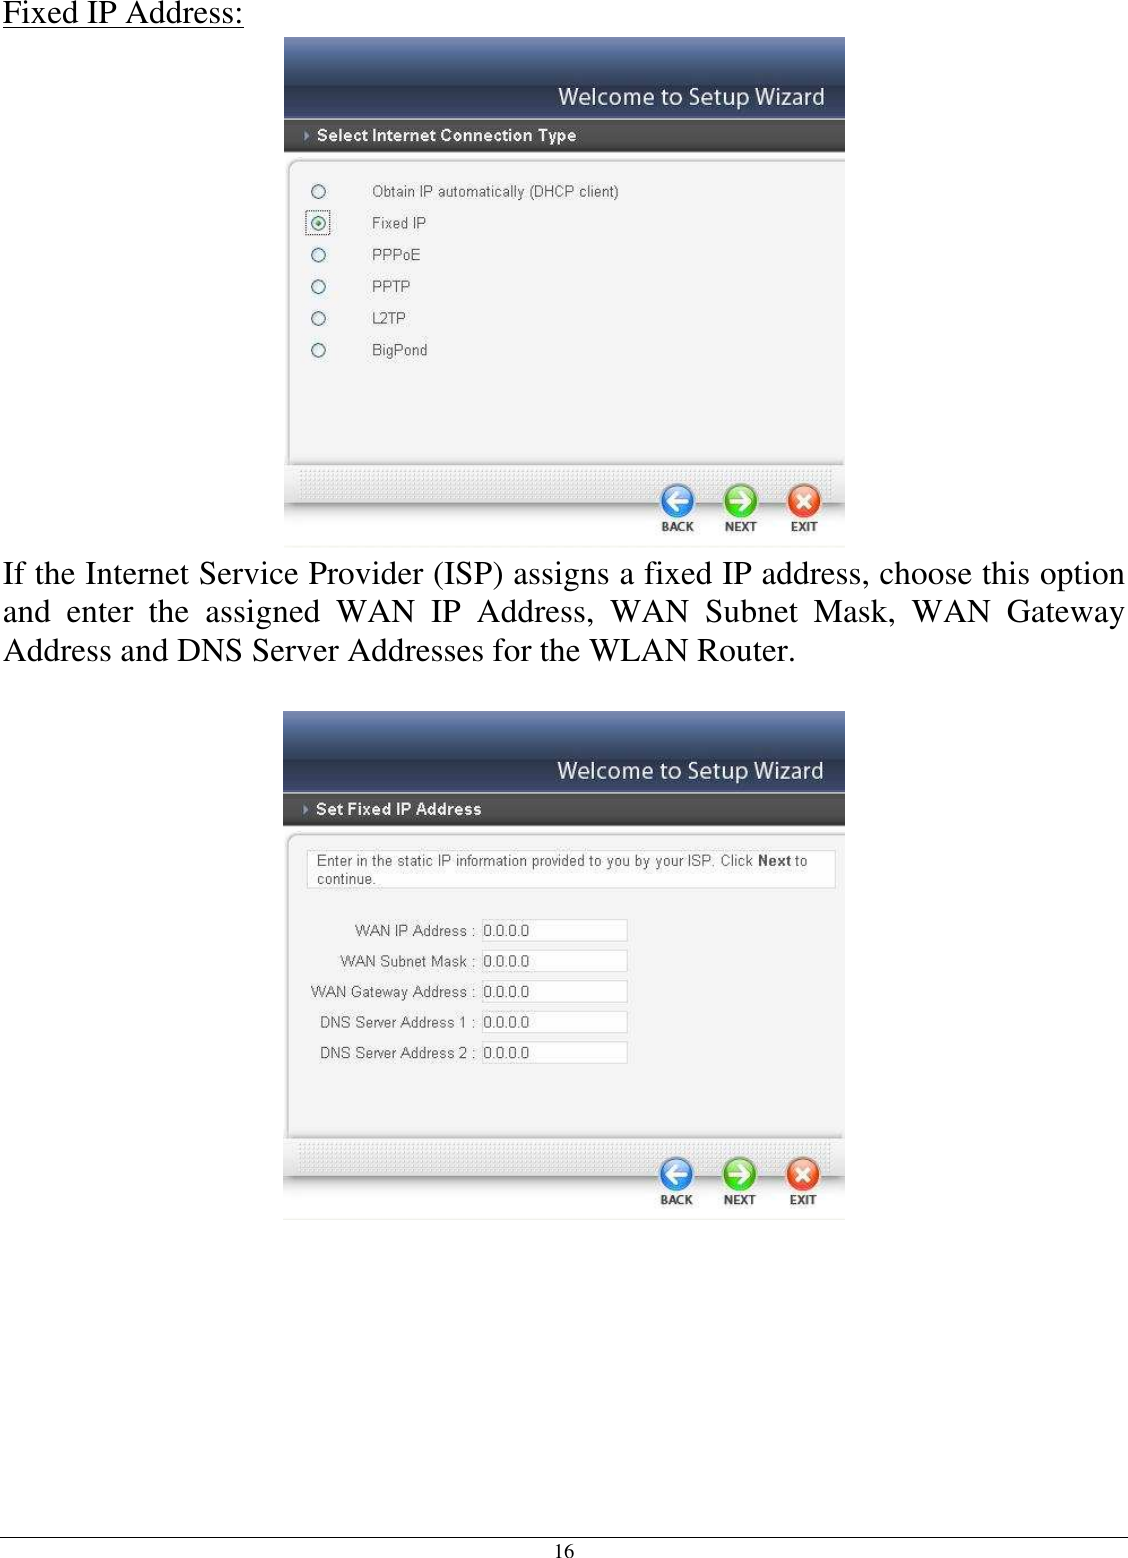 16 Fixed IP Address:  If the Internet Service Provider (ISP) assigns a fixed IP address, choose this option and  enter  the  assigned  WAN  IP  Address,  WAN  Subnet  Mask,  WAN  Gateway Address and DNS Server Addresses for the WLAN Router.    